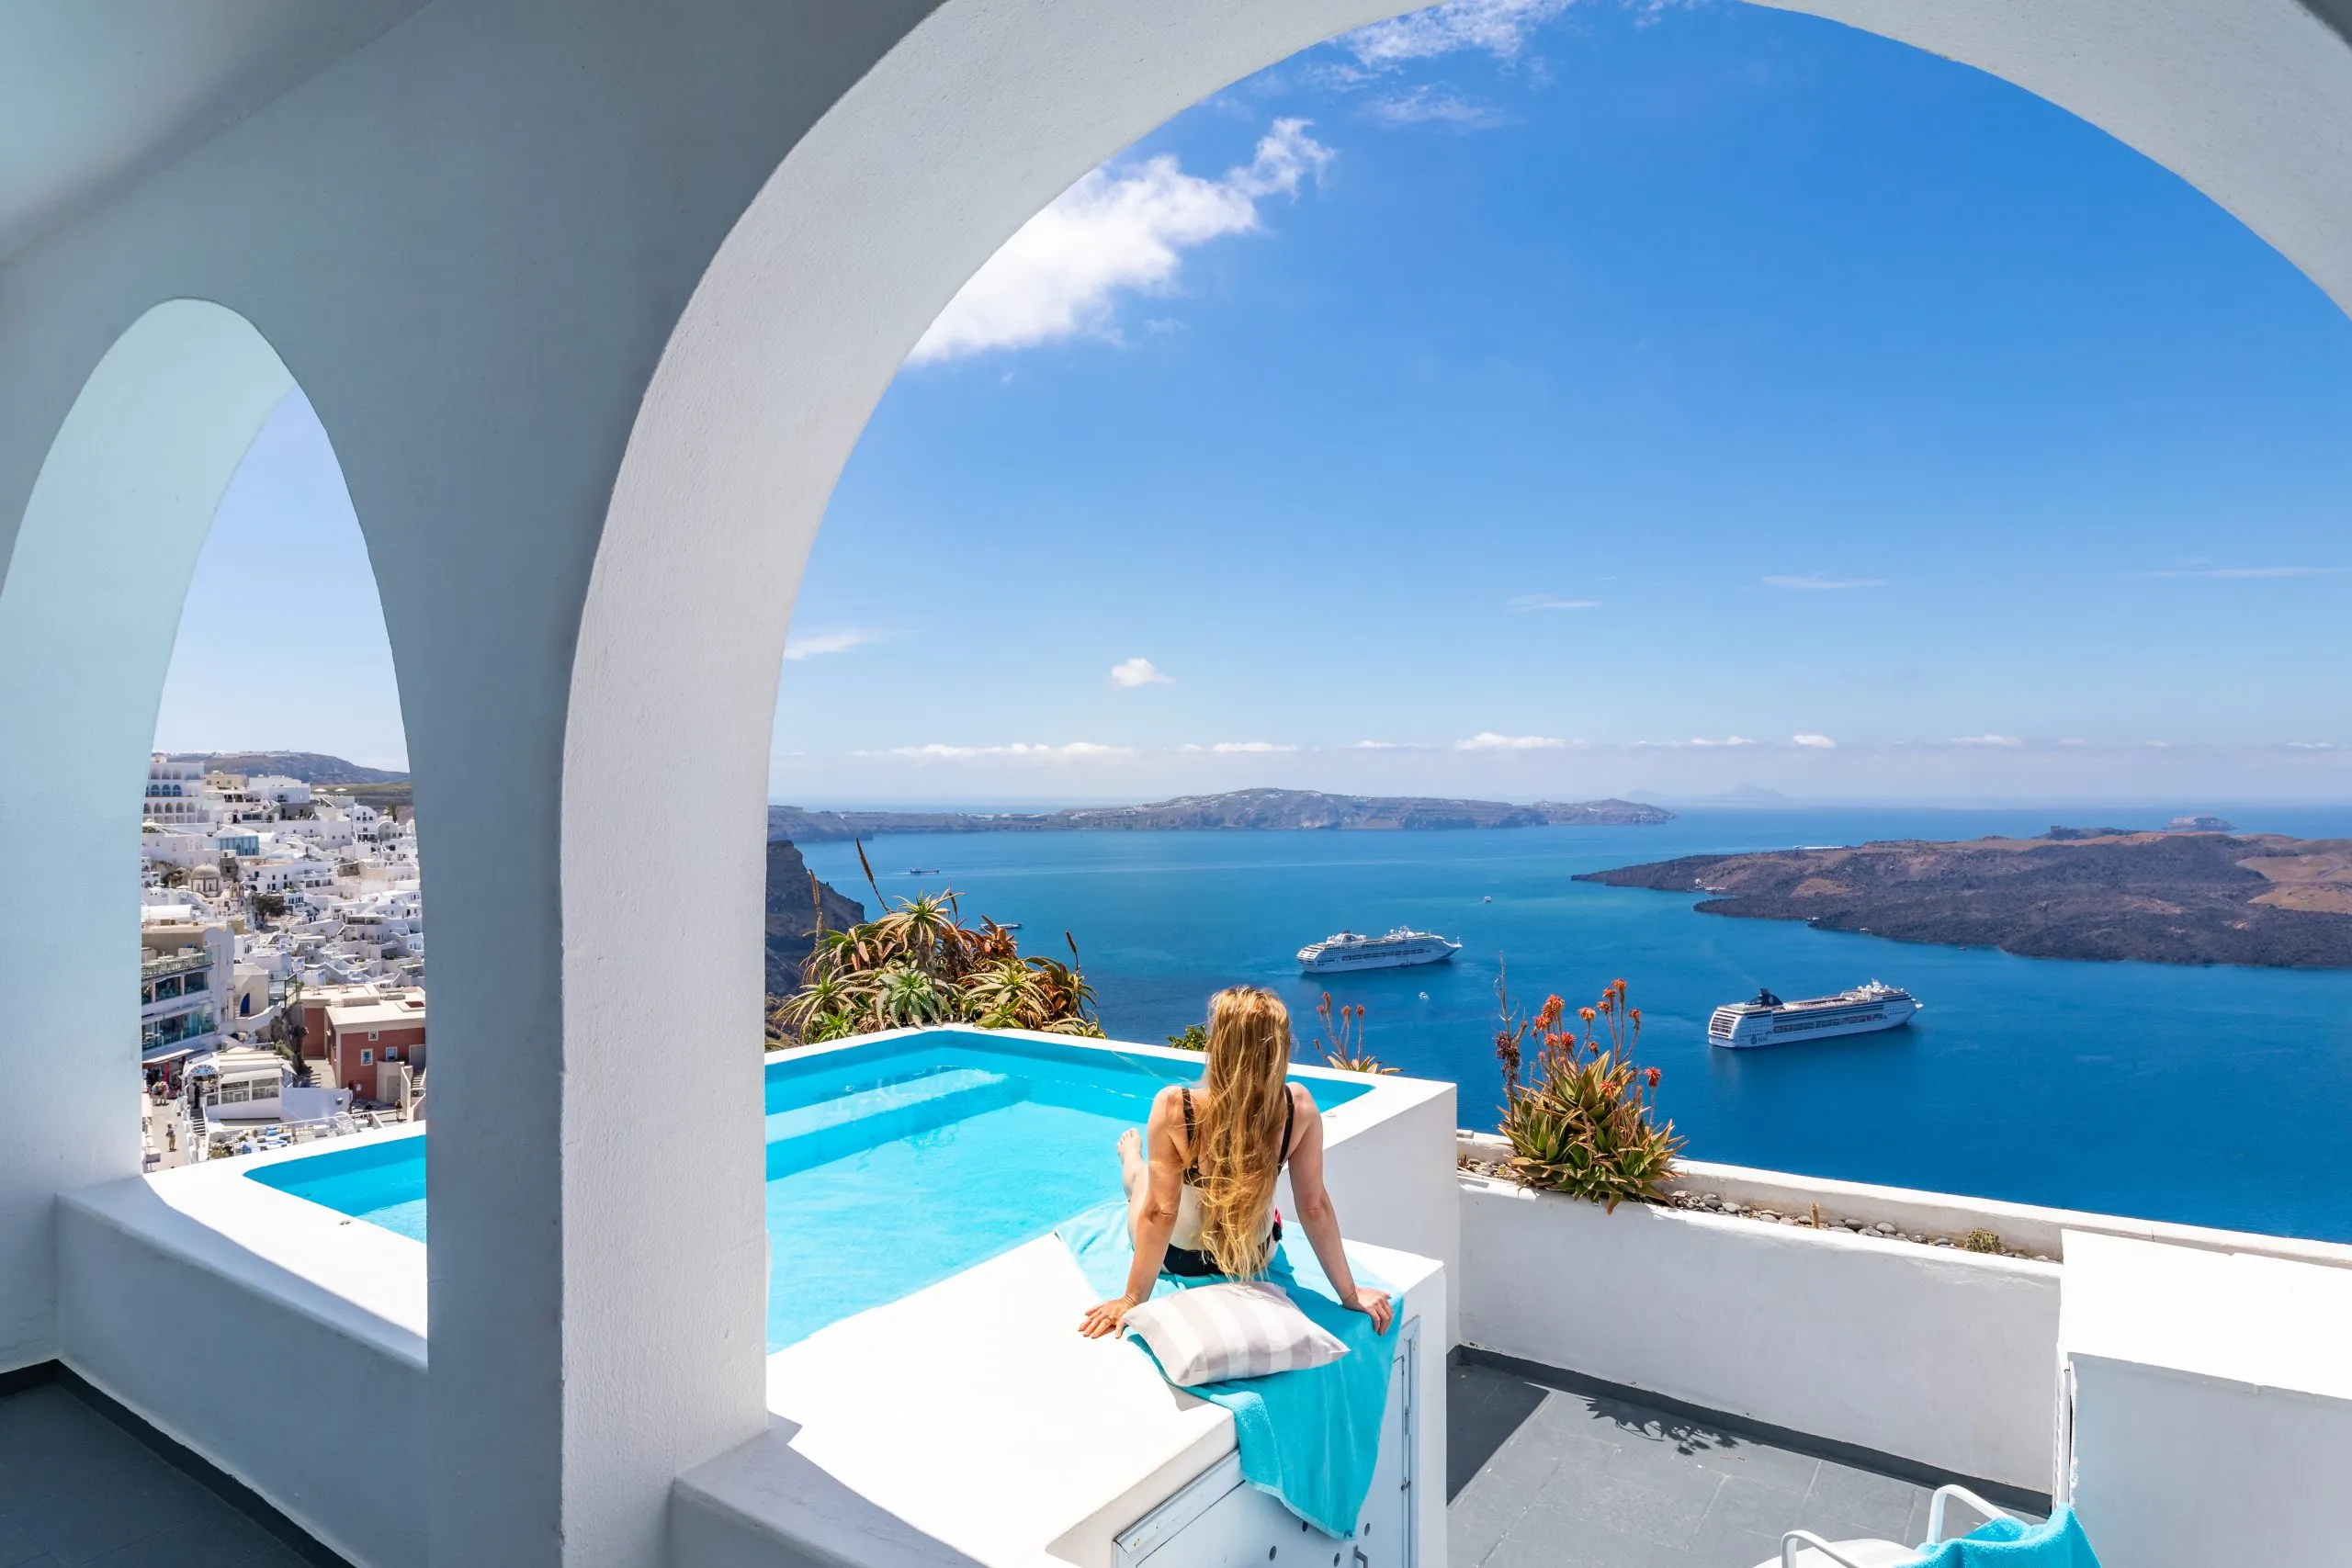 Luxury summer vacation background. Young woman on vacation at Santorini, women at the swimming pool looking out over the Caldera ocean of Santorini, Girl at the infinity pool Santorini Greece